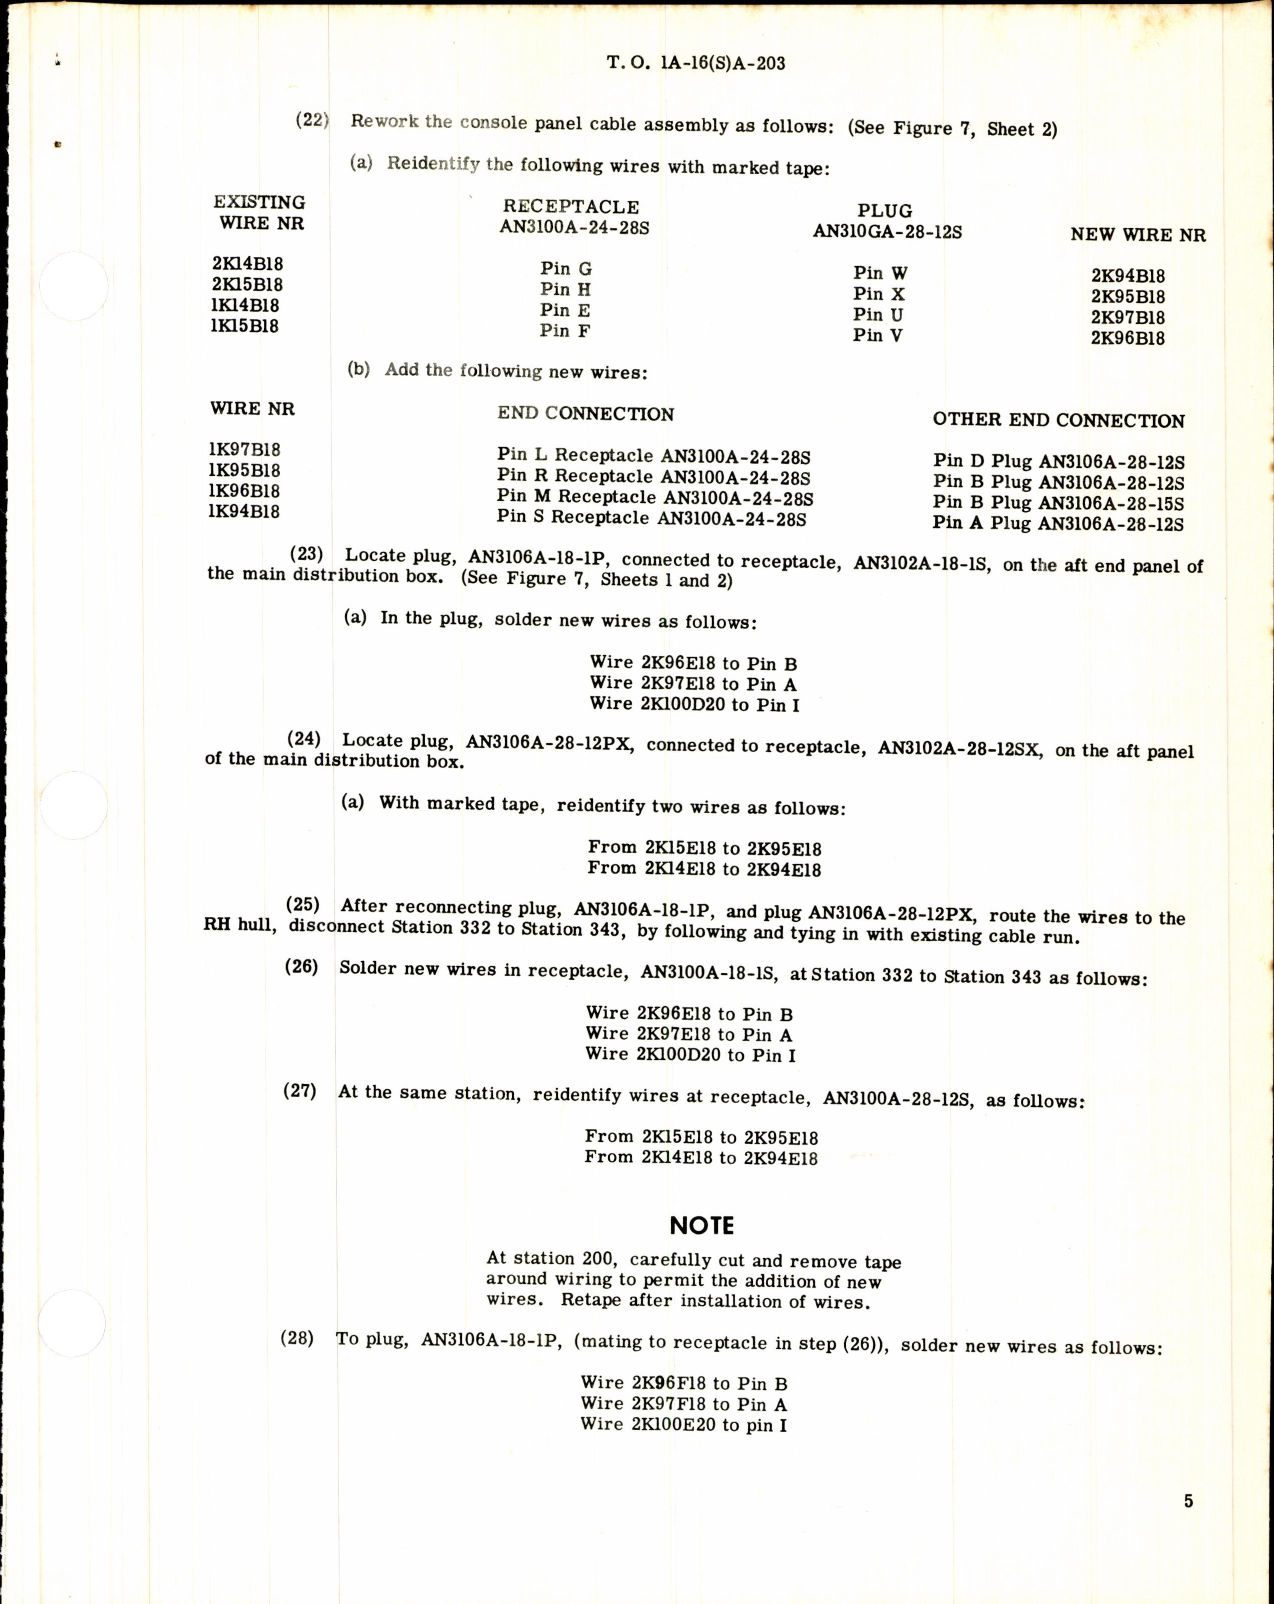 Sample page 5 from AirCorps Library document: Modification of Power Plant Carburetor Air Induction System for SA-16A Aircraft